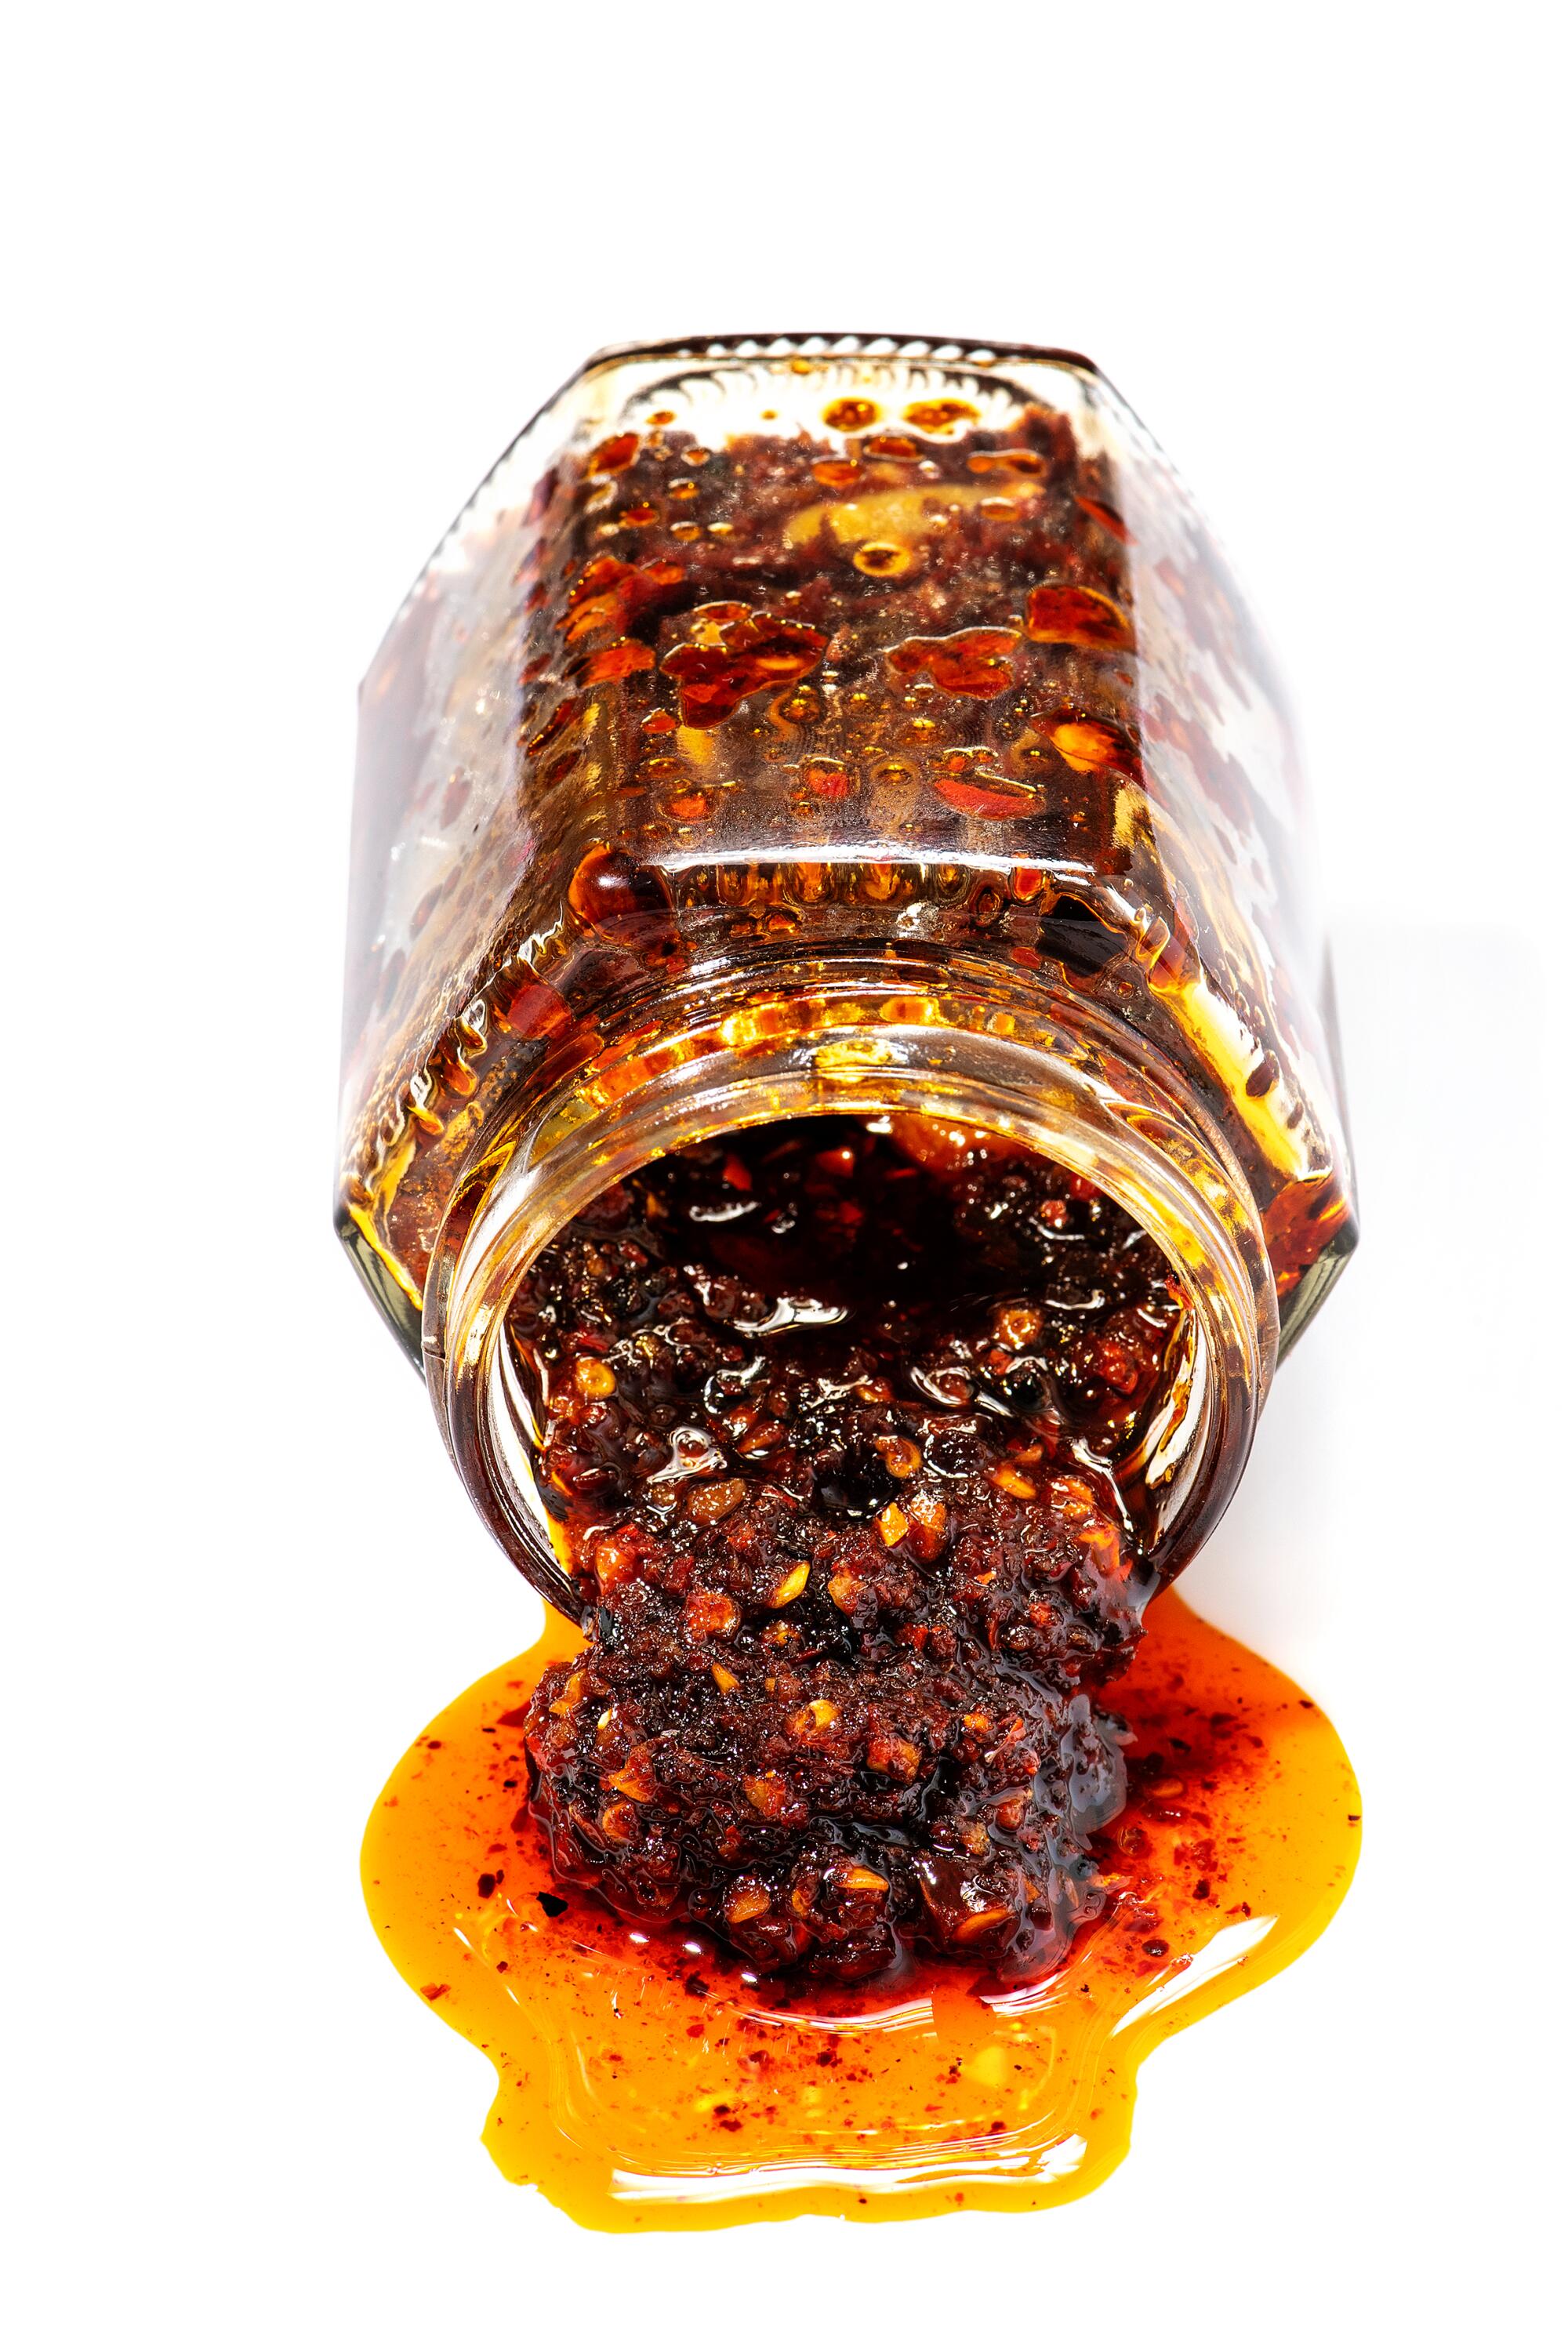 A jar of chile sauce can be found on most tables at restaurants serving dumplings in the San Gabriel Valley.